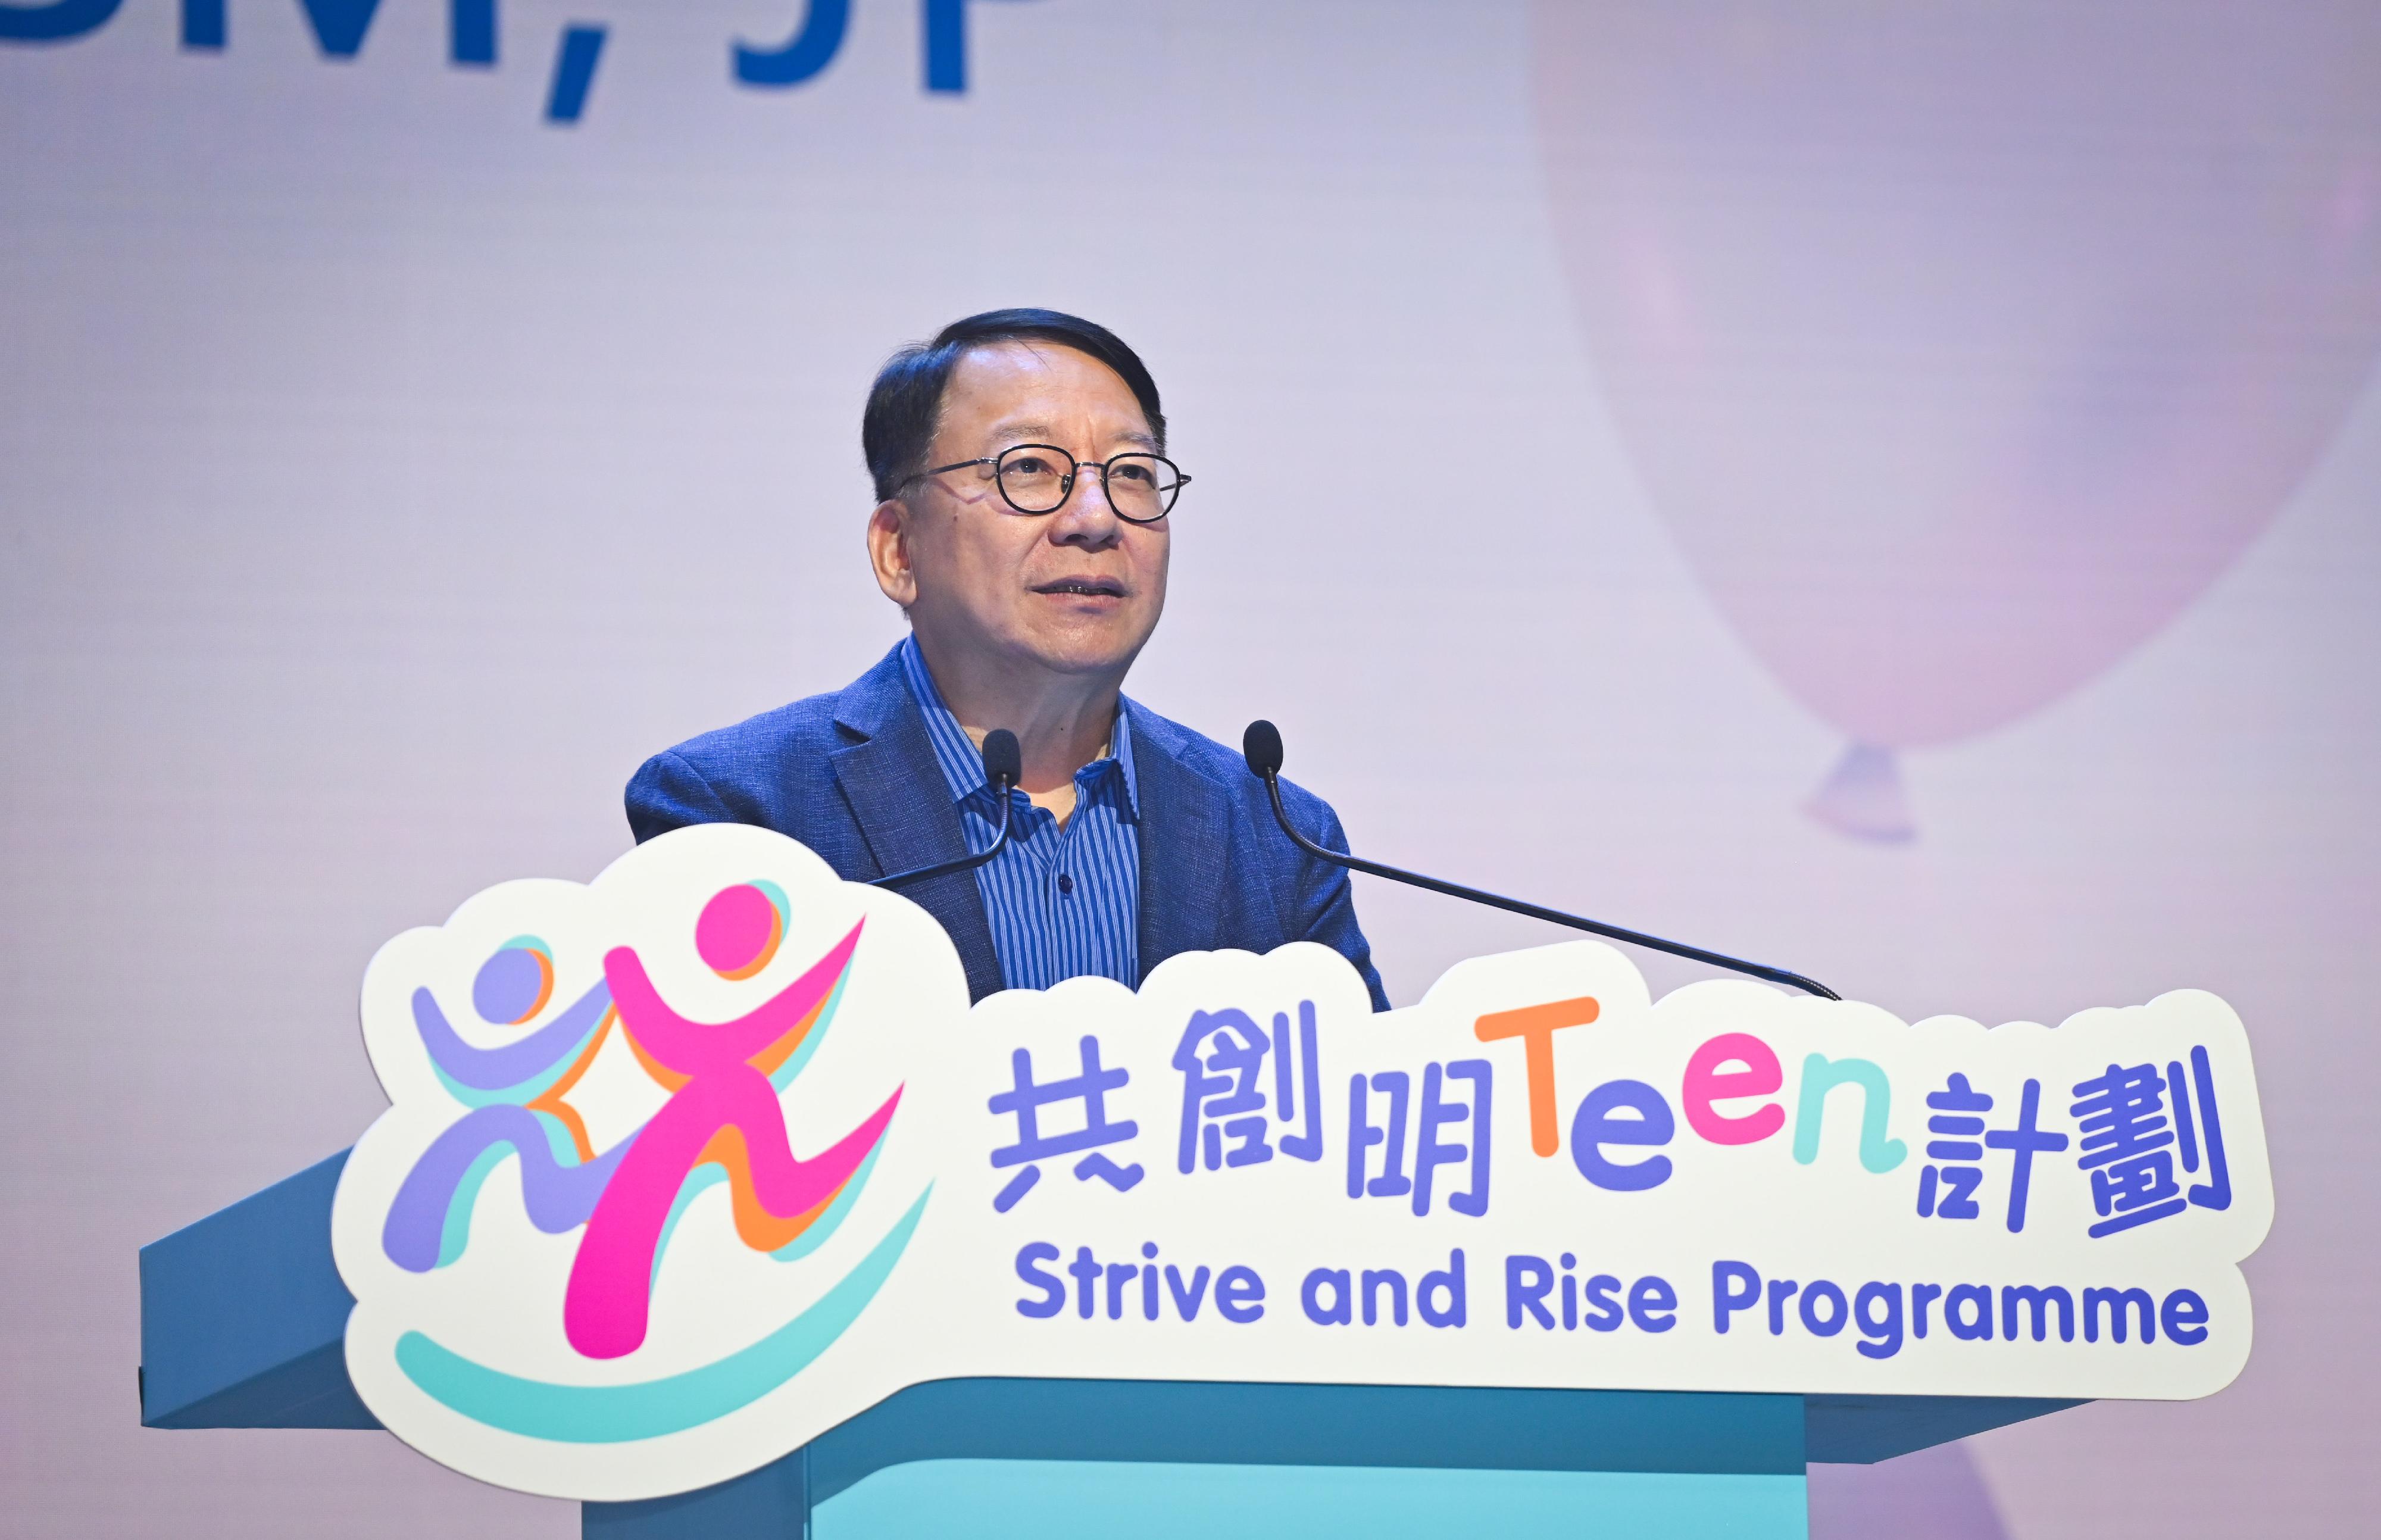 The Chief Secretary for Administration, Mr Chan Kwok-ki, speaks at the Graduation Ceremony of the Strive and Rise Programme today (November 4).